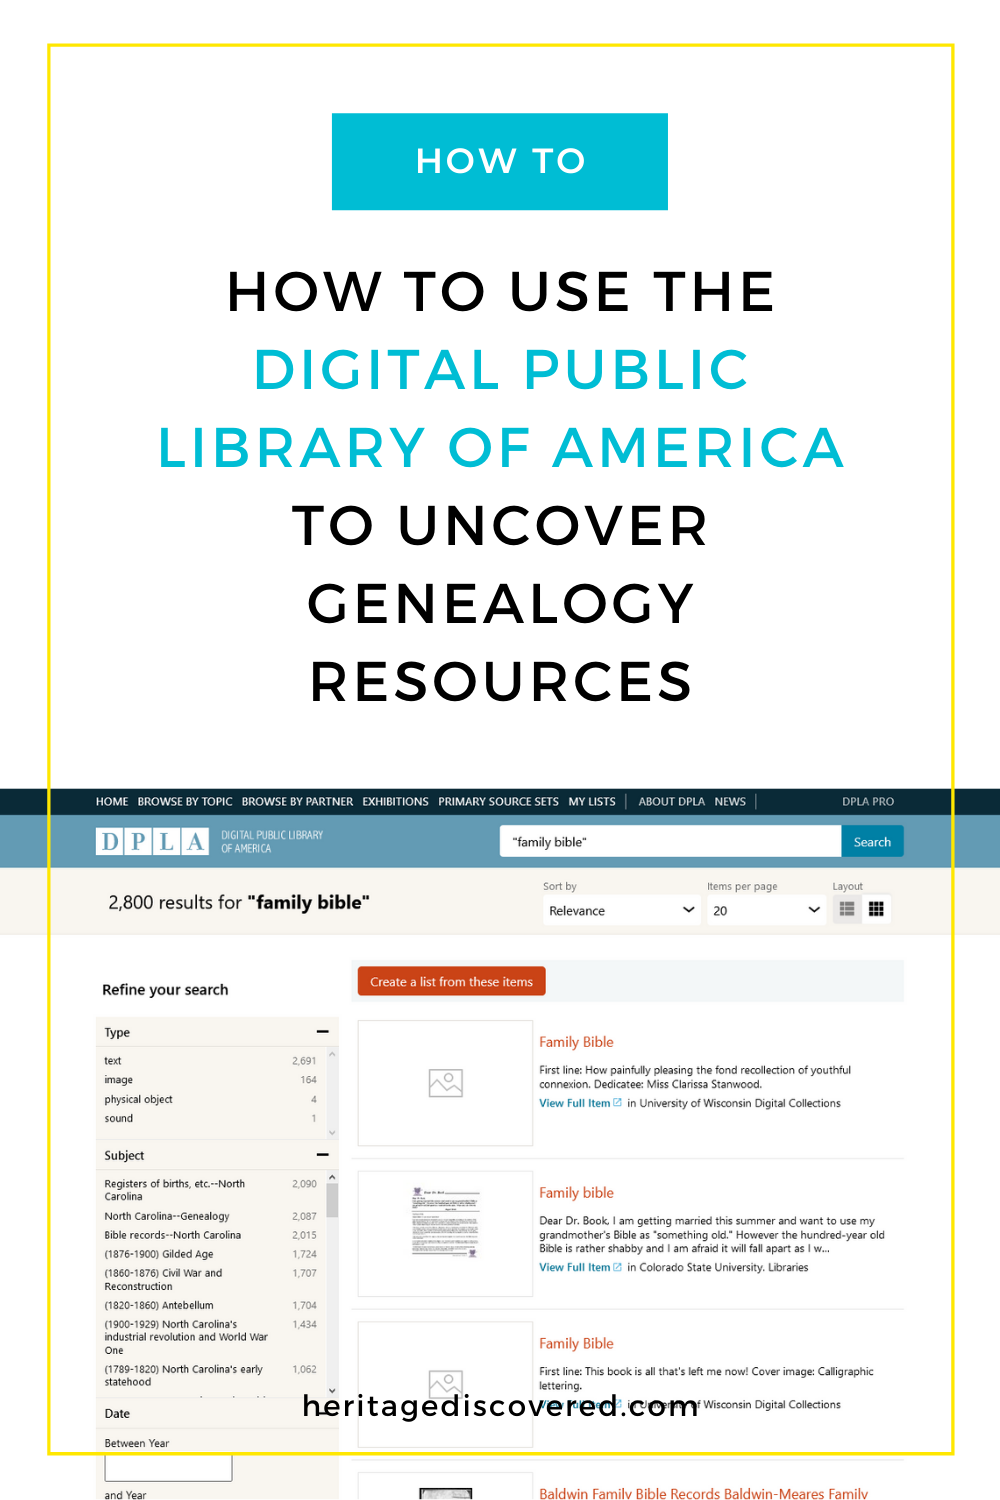 how_use_digital_public_library_uncover_genealogy_resources.png